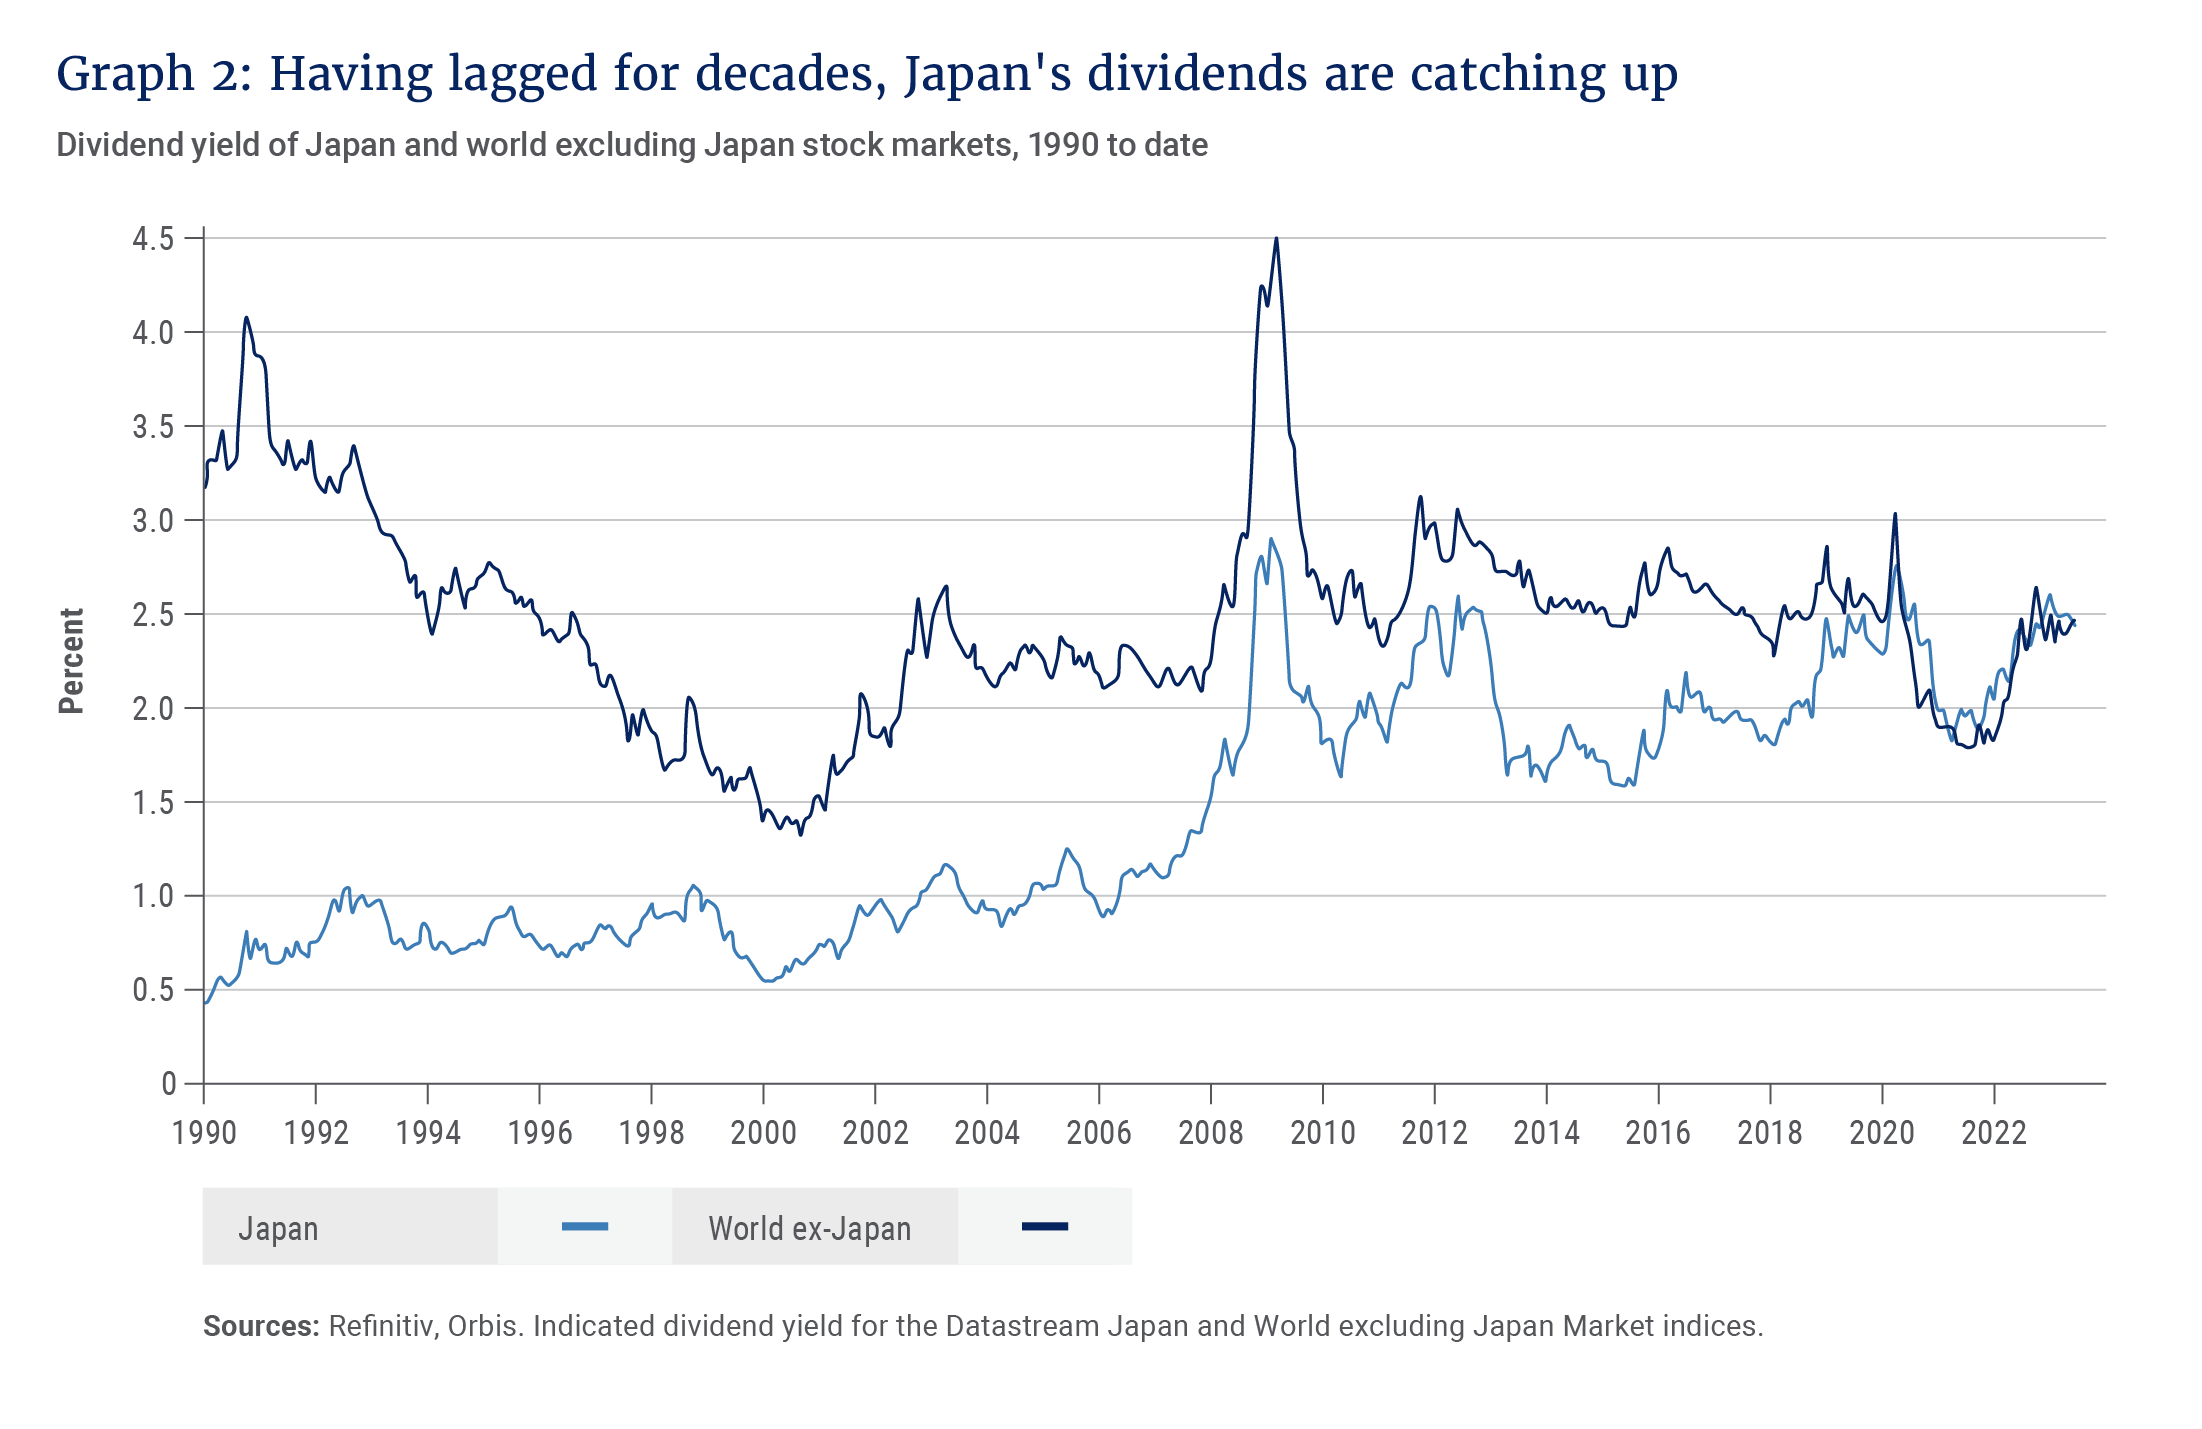 Having lagged for decades, Japan’s dividends are catching up